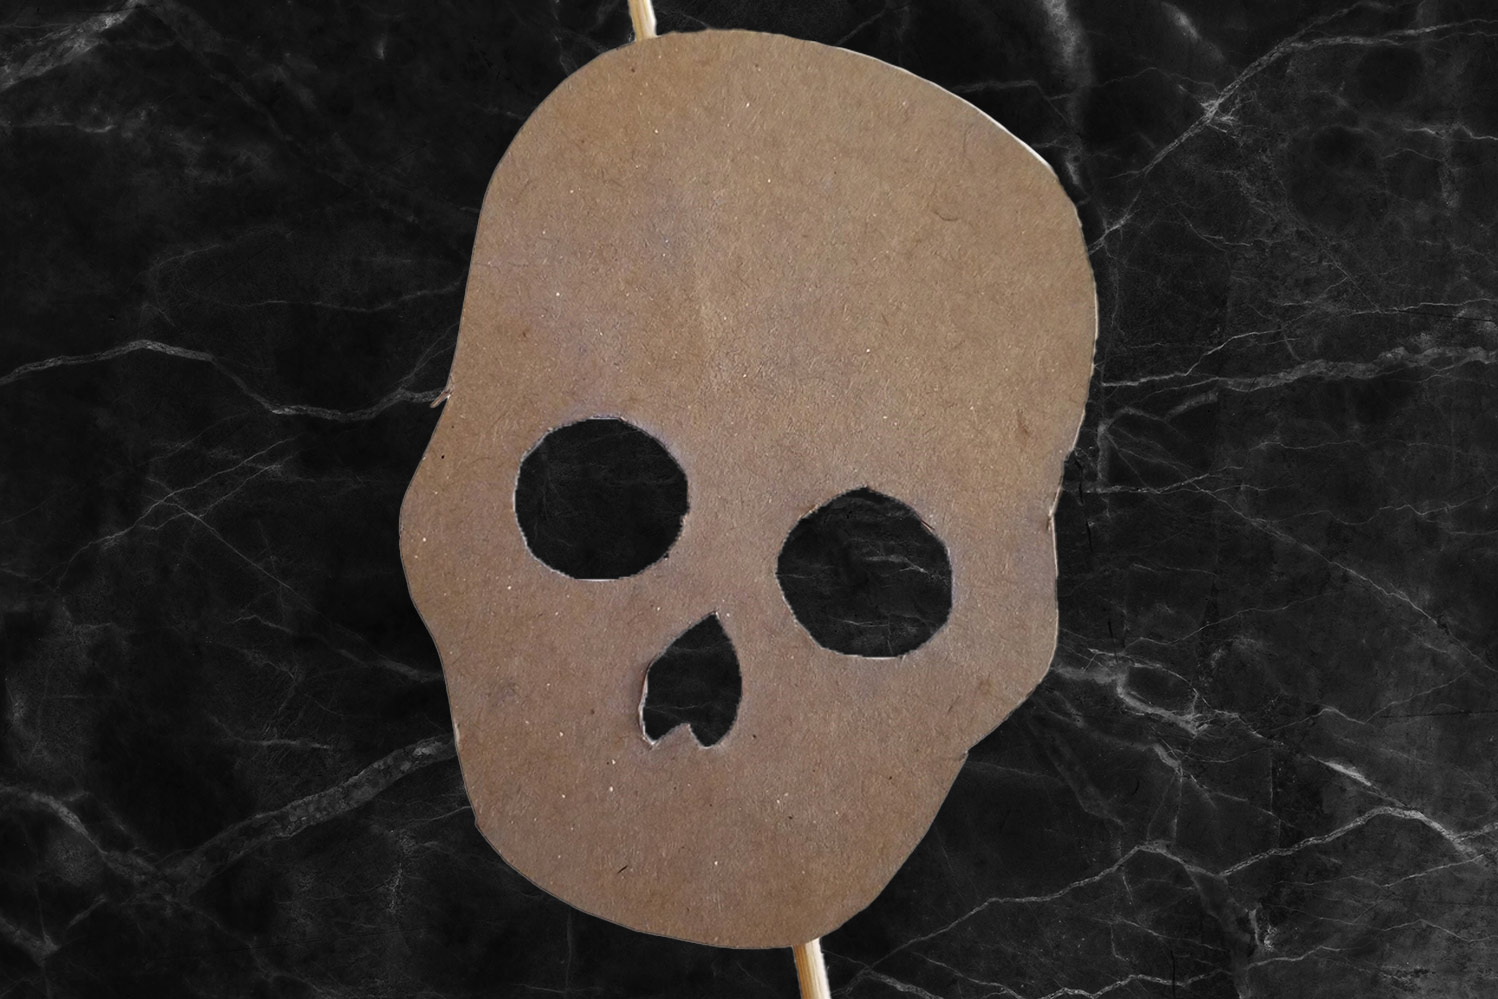 A cardboard cut-out of a skull taped to a stick on a black marble background